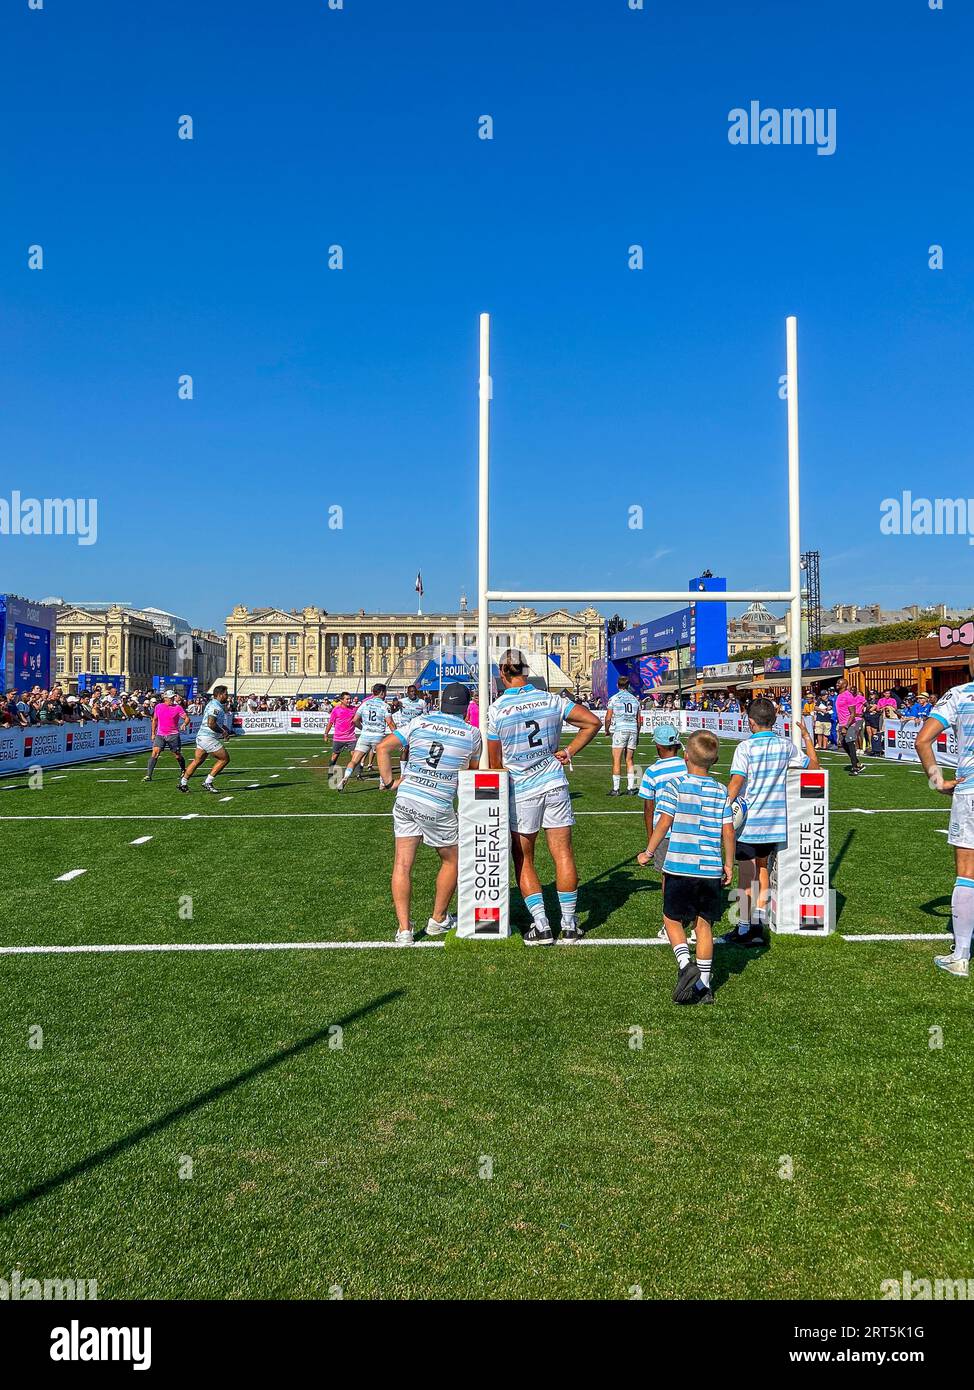 Paris, France, Sept. 10, 2023, Crowd People, Players on Field, at World Rugby Championship, Fan Zone, (Place de la Concorde) Stock Photo